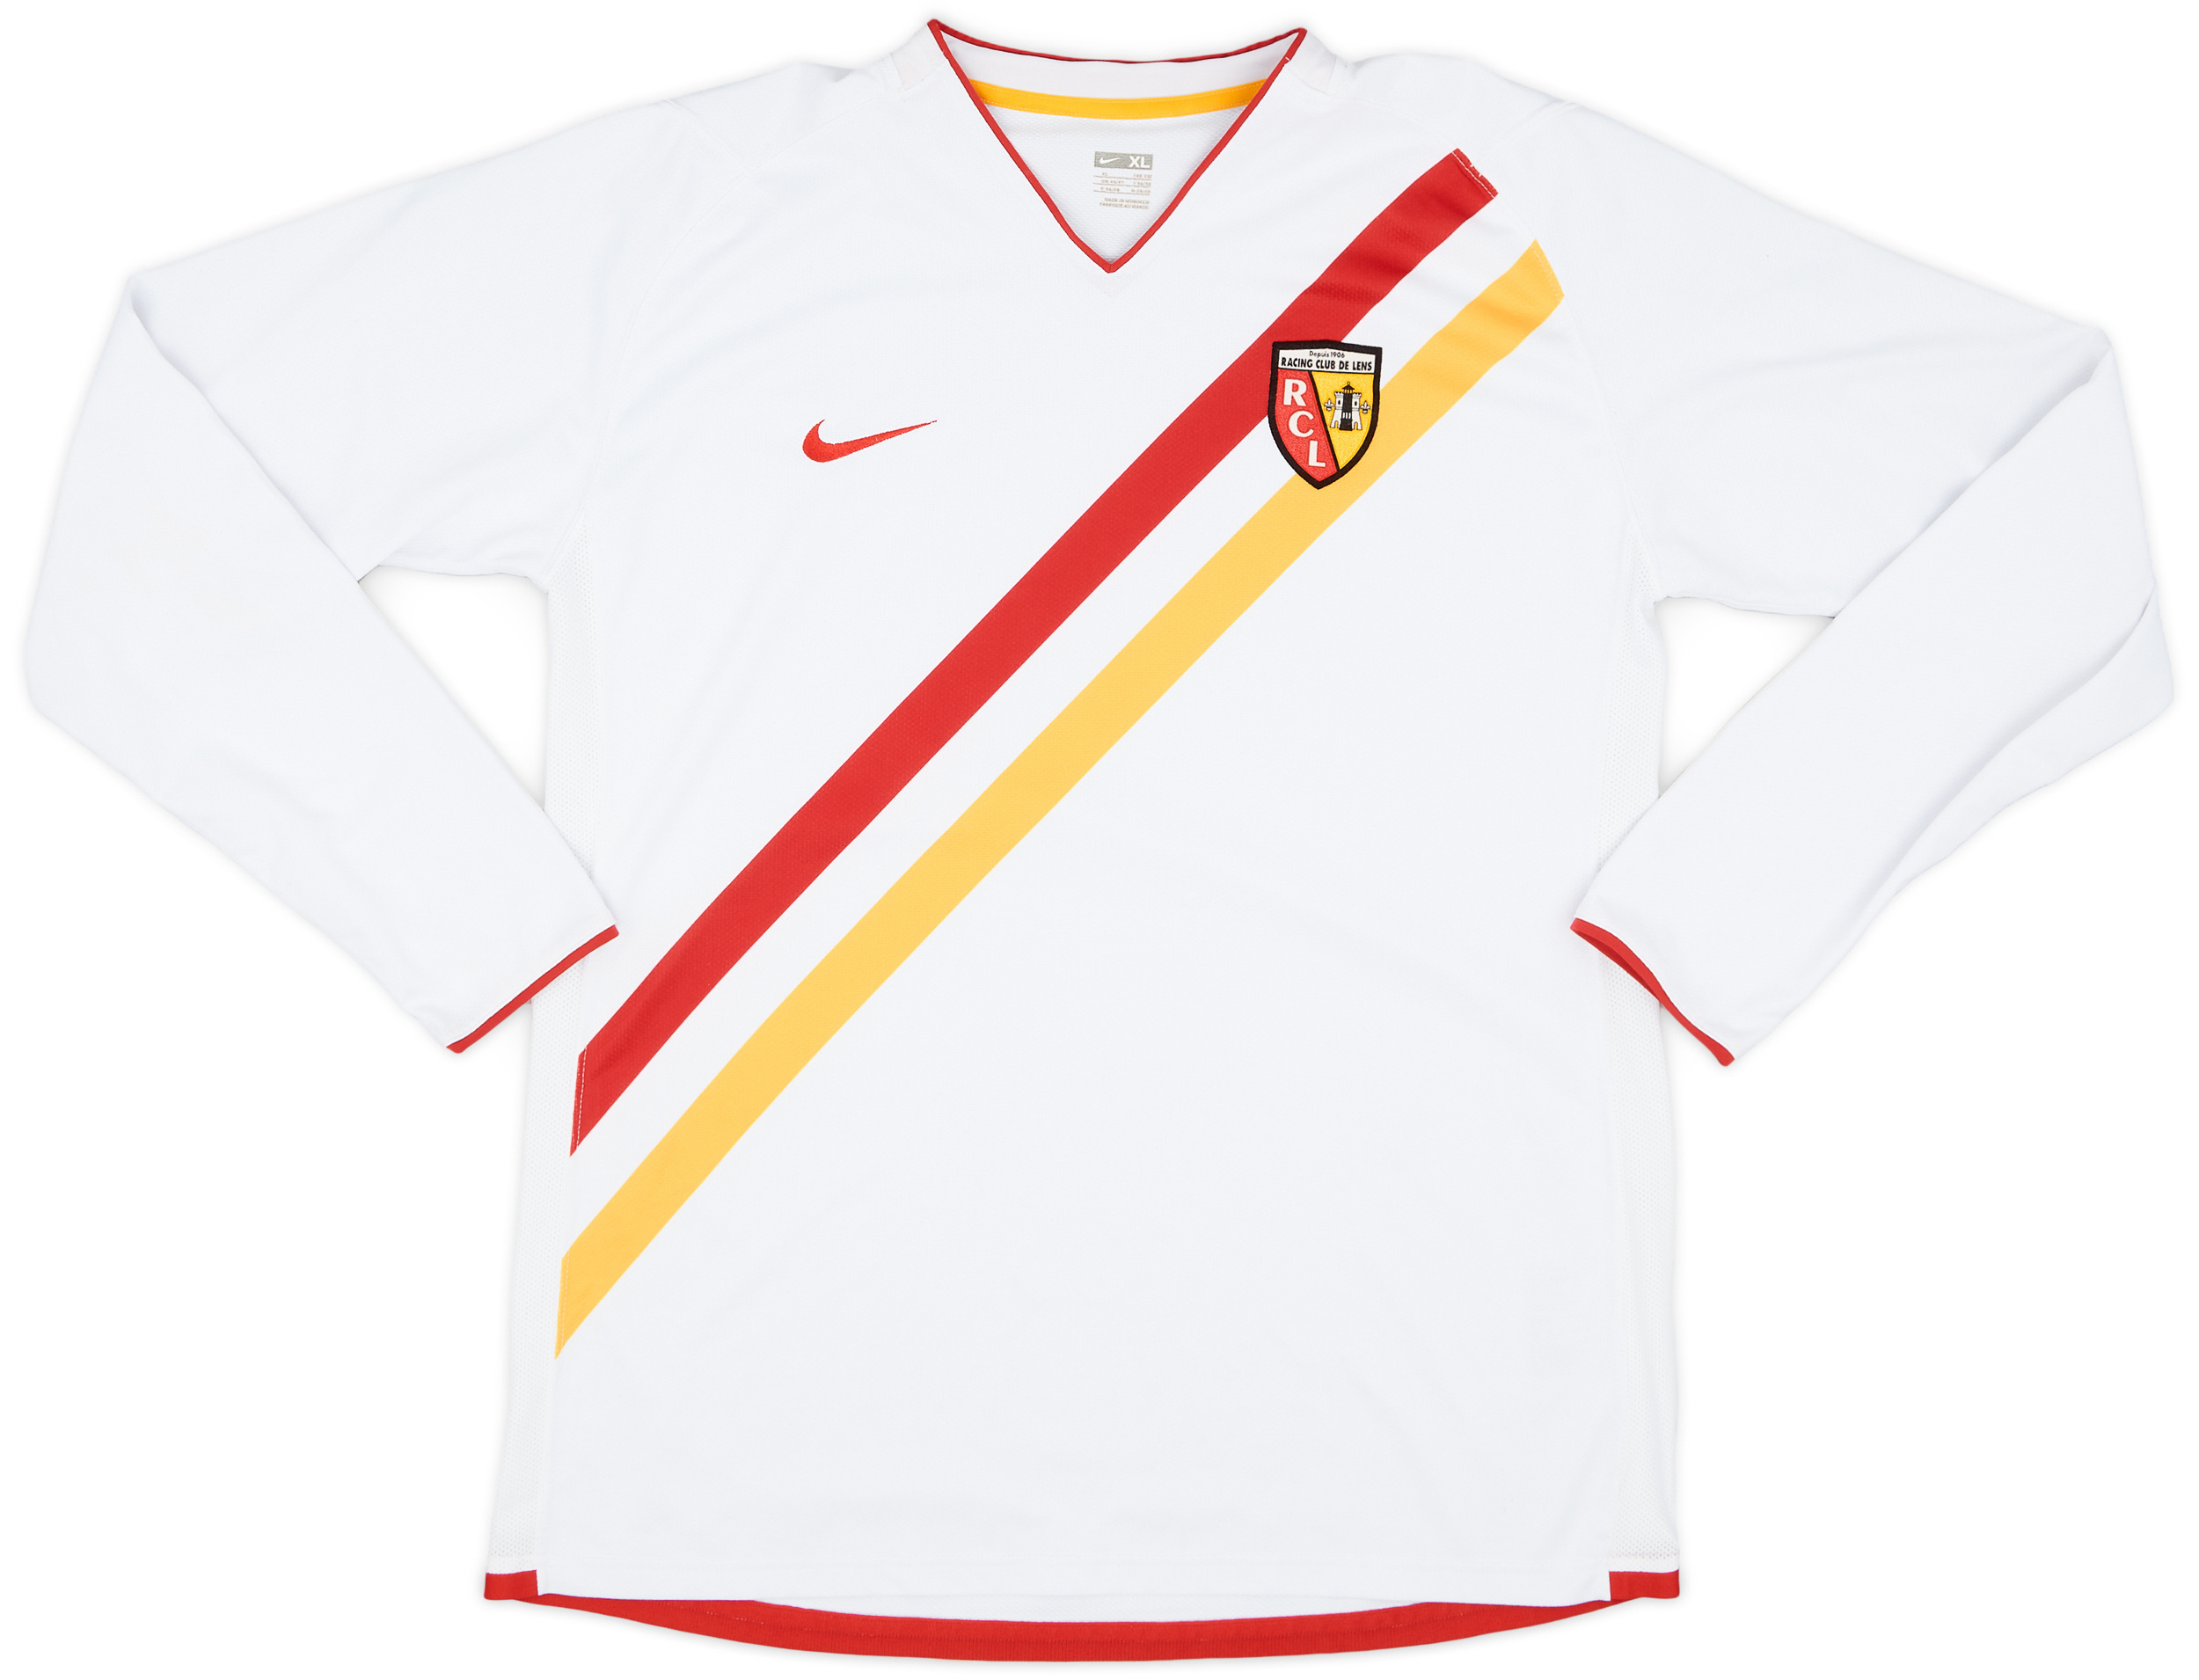 2006-07 Lens Player Issue Away Shirt - 9/10 - ()